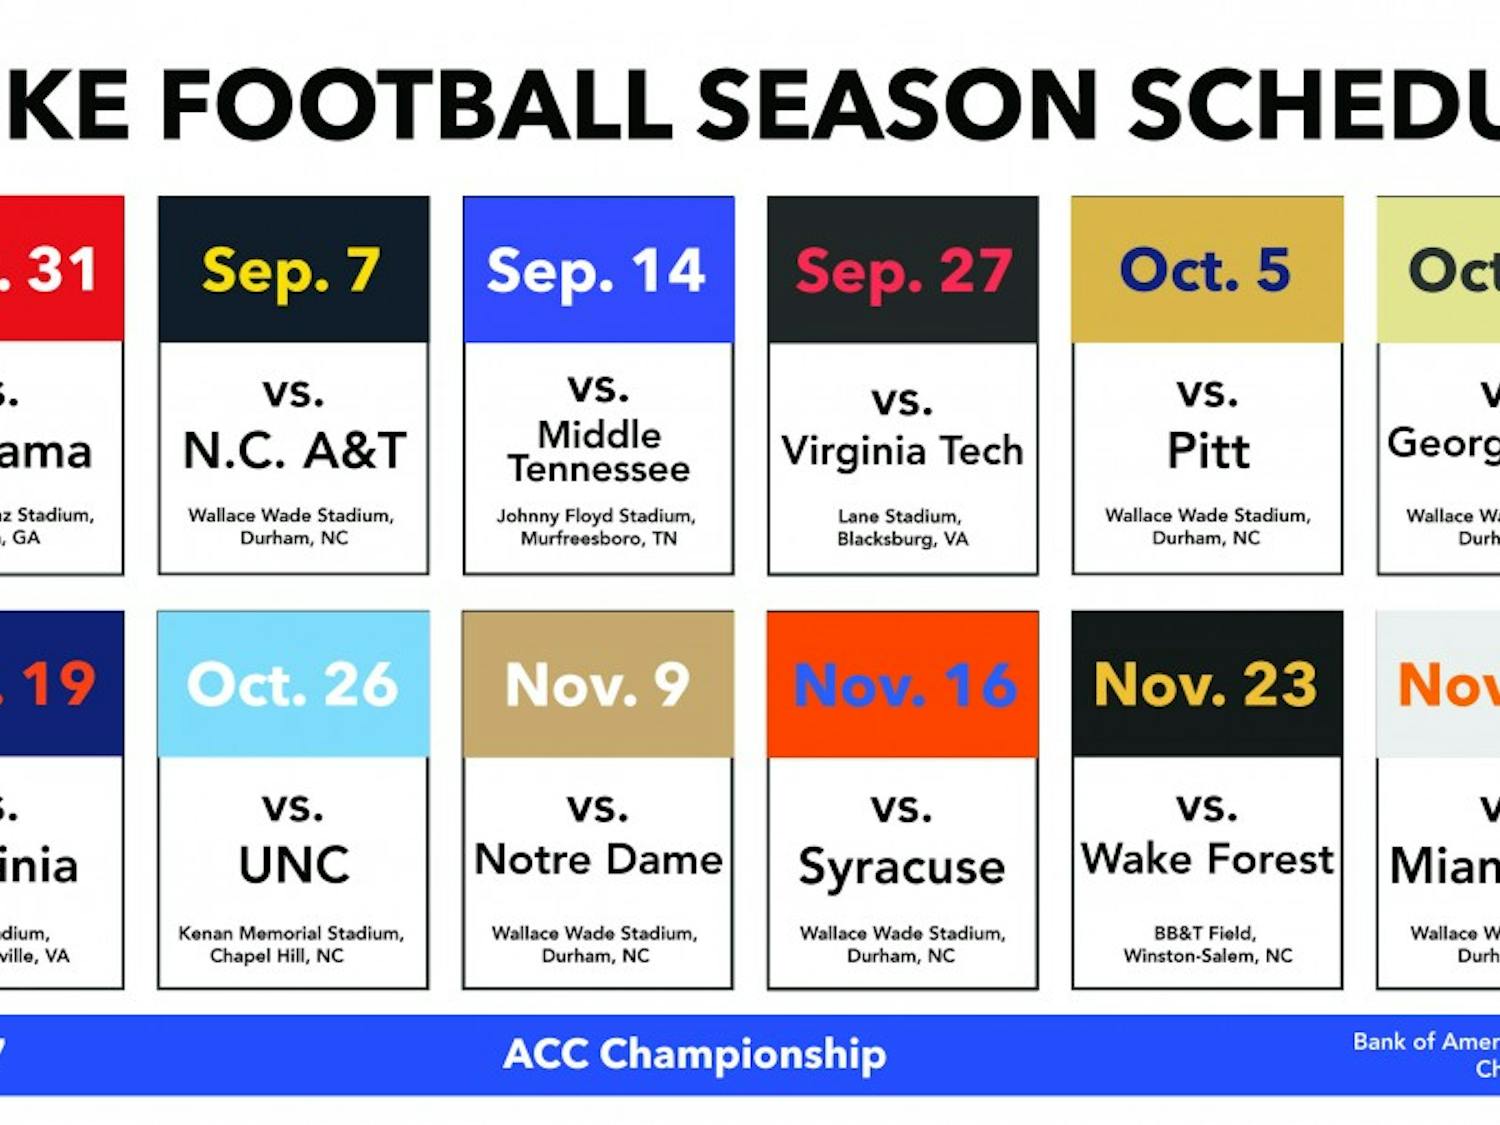 Duke will face two top-10 opponents in its nonconference schedule this season